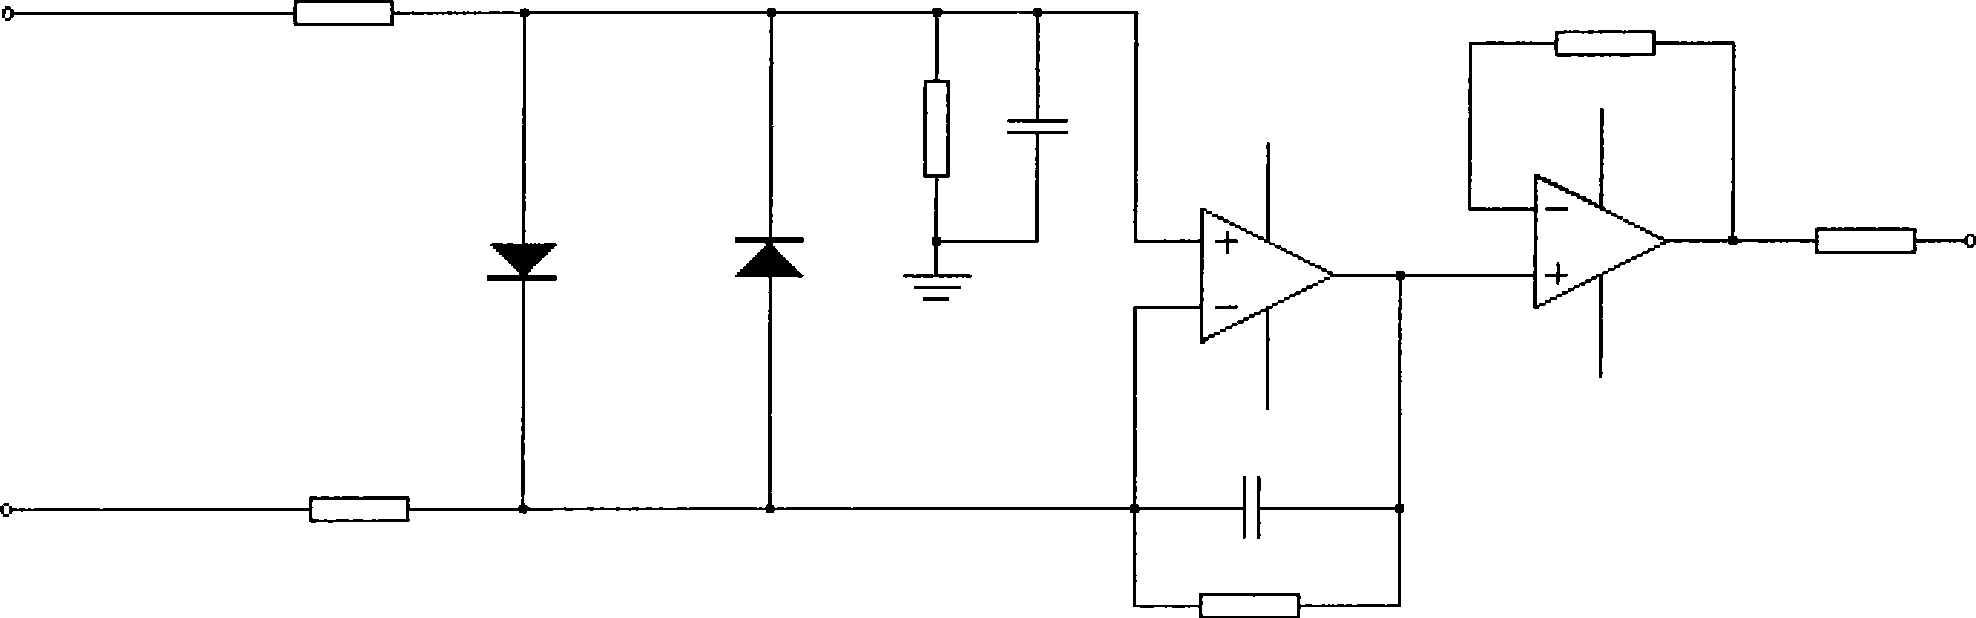 DC bus-bar voltage collection circuit for frequency changer